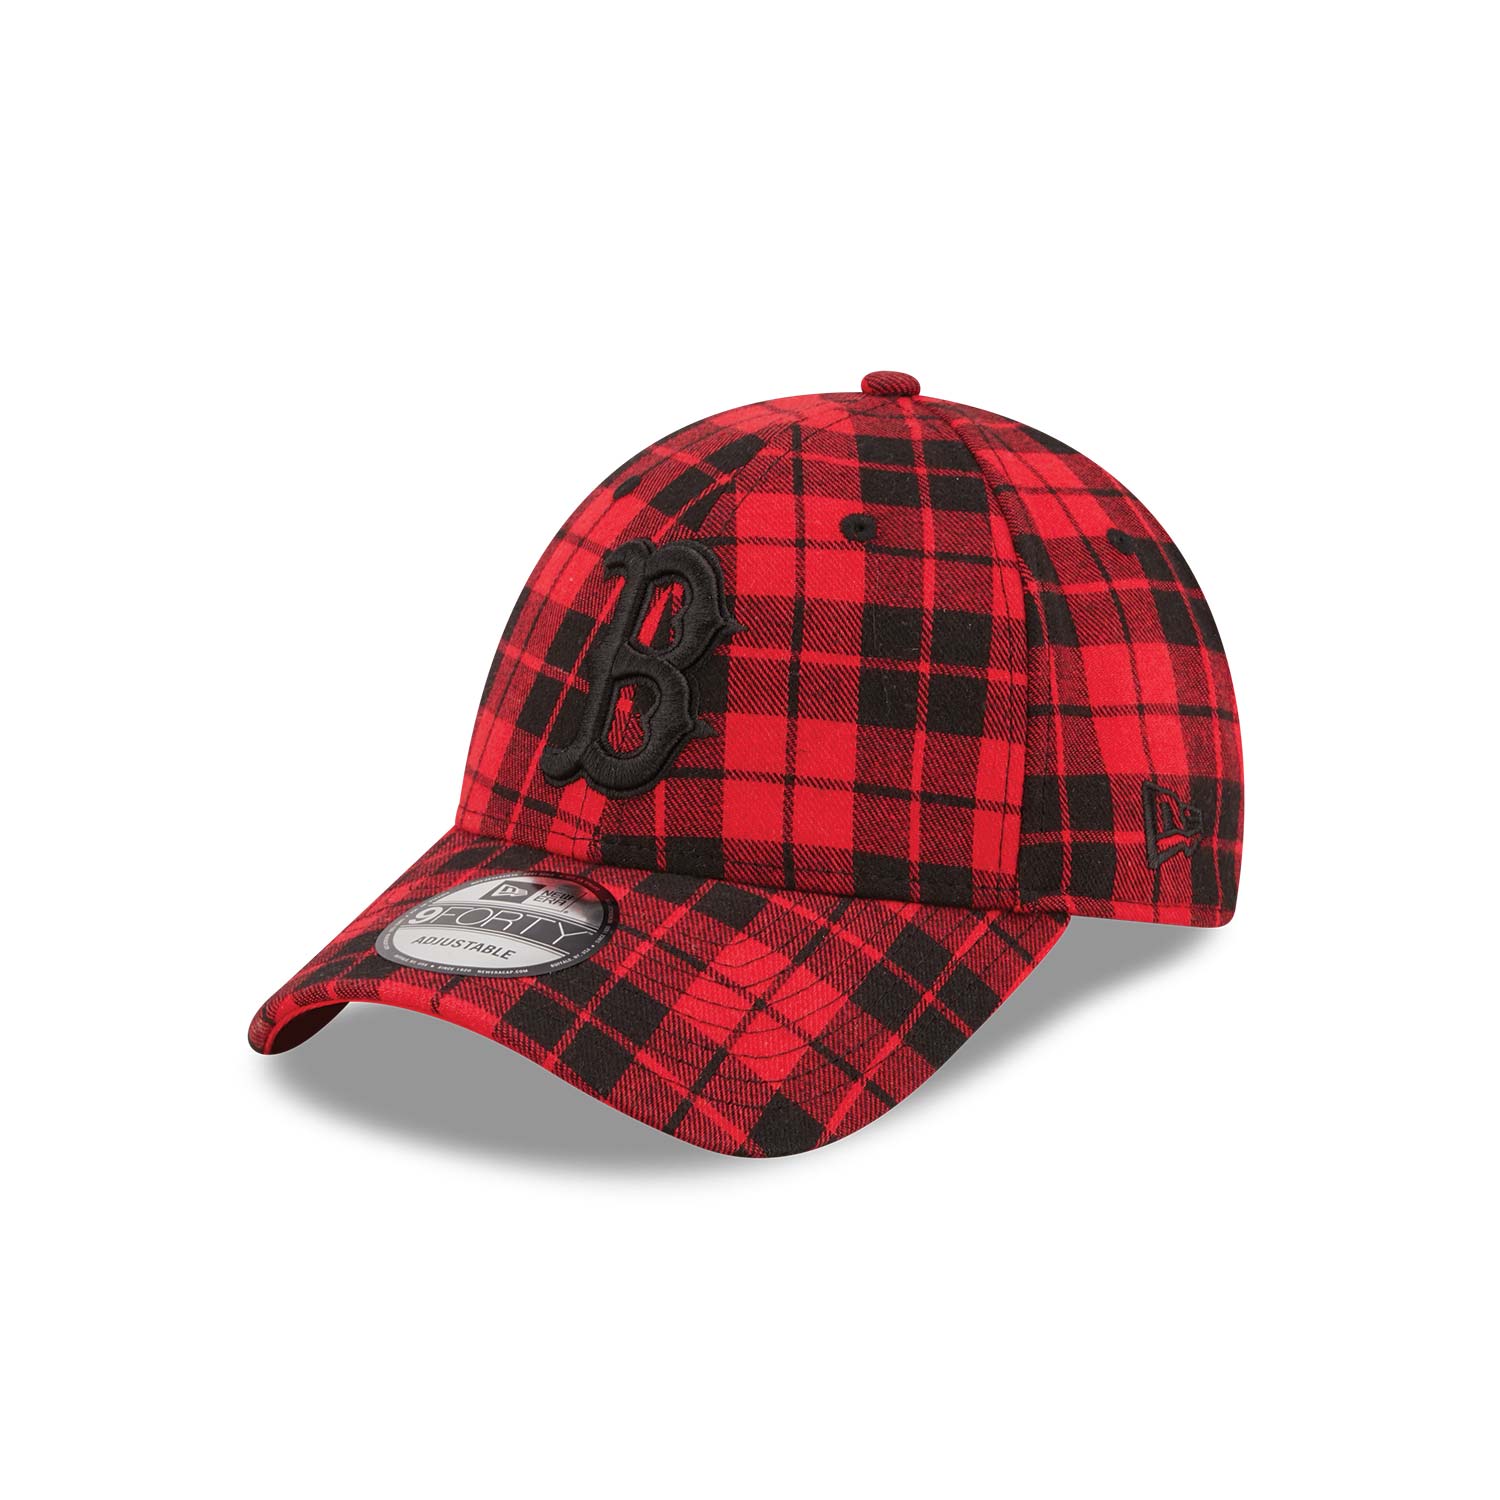 Boston Red Sox Plaid Red 9FORTY Adjustable Cap